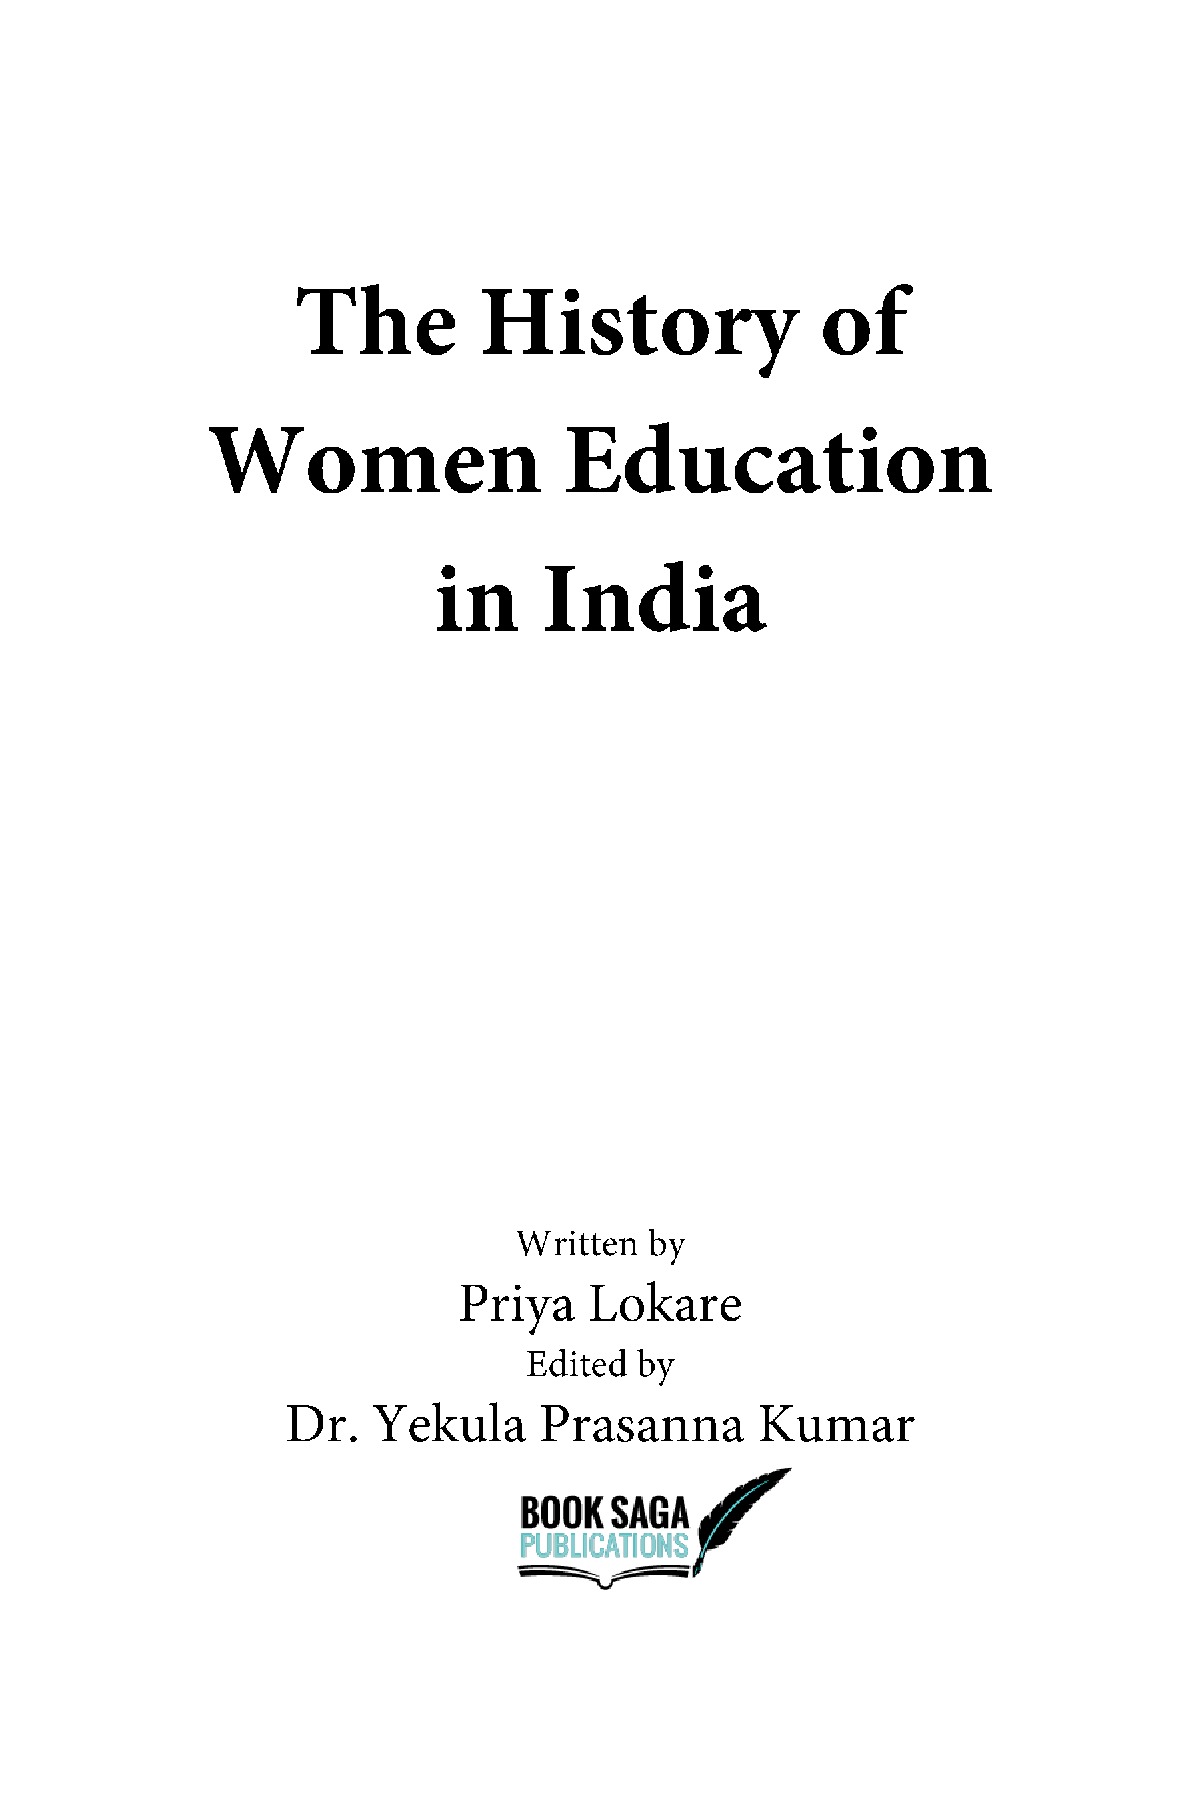 project on women's education in india pdf